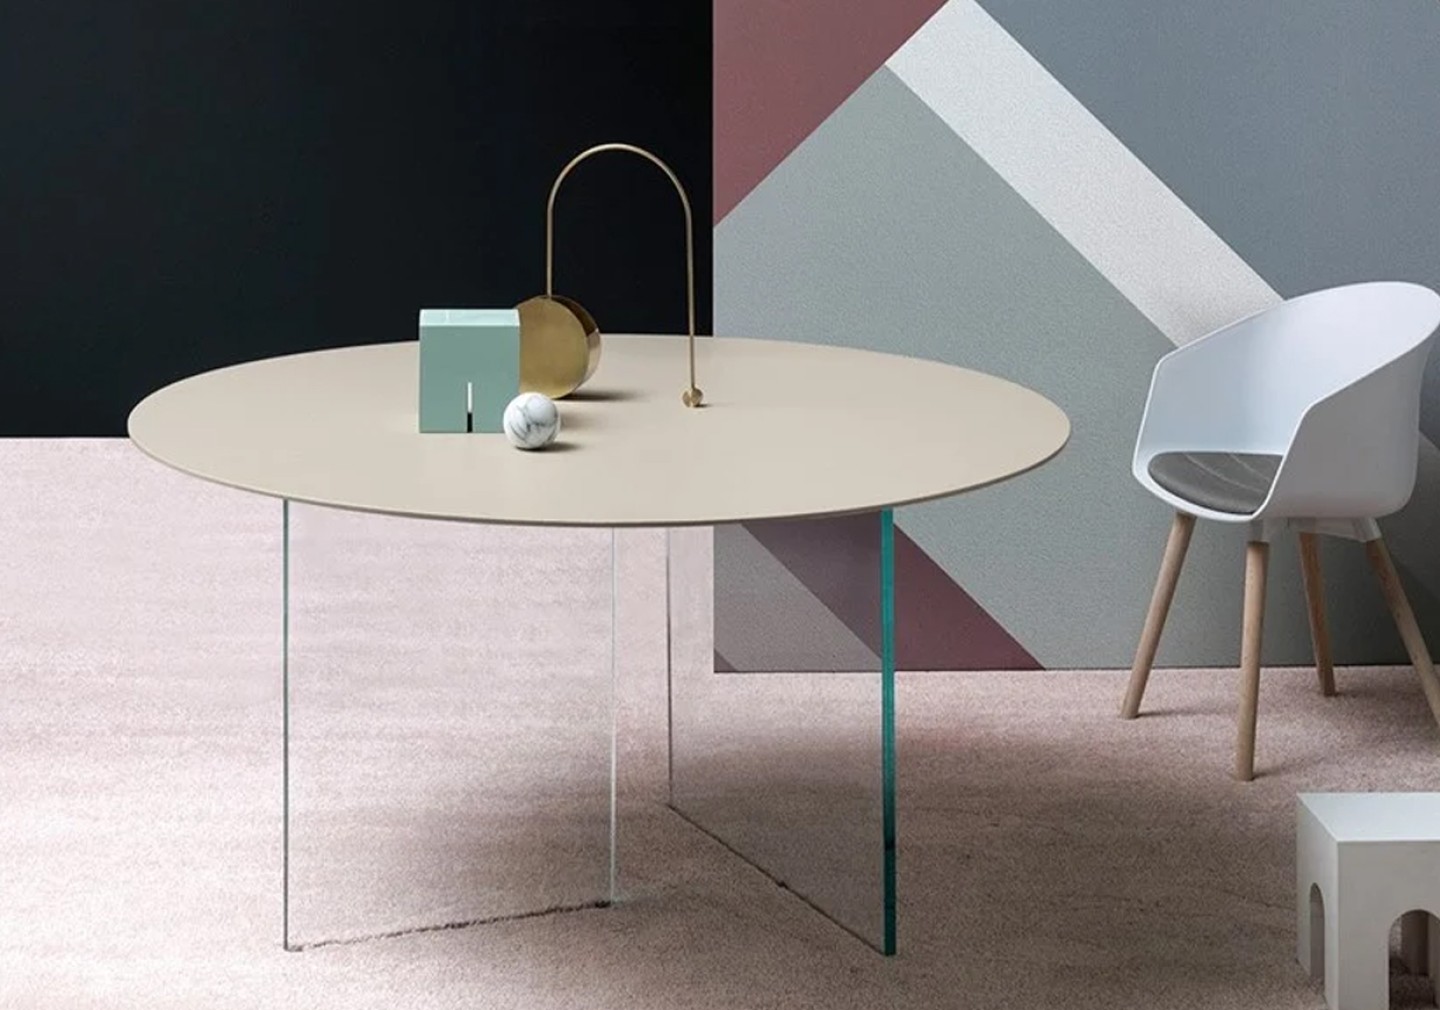 THE MANHATTAN ROUND DINING TABLE BY DEVINA NAIS